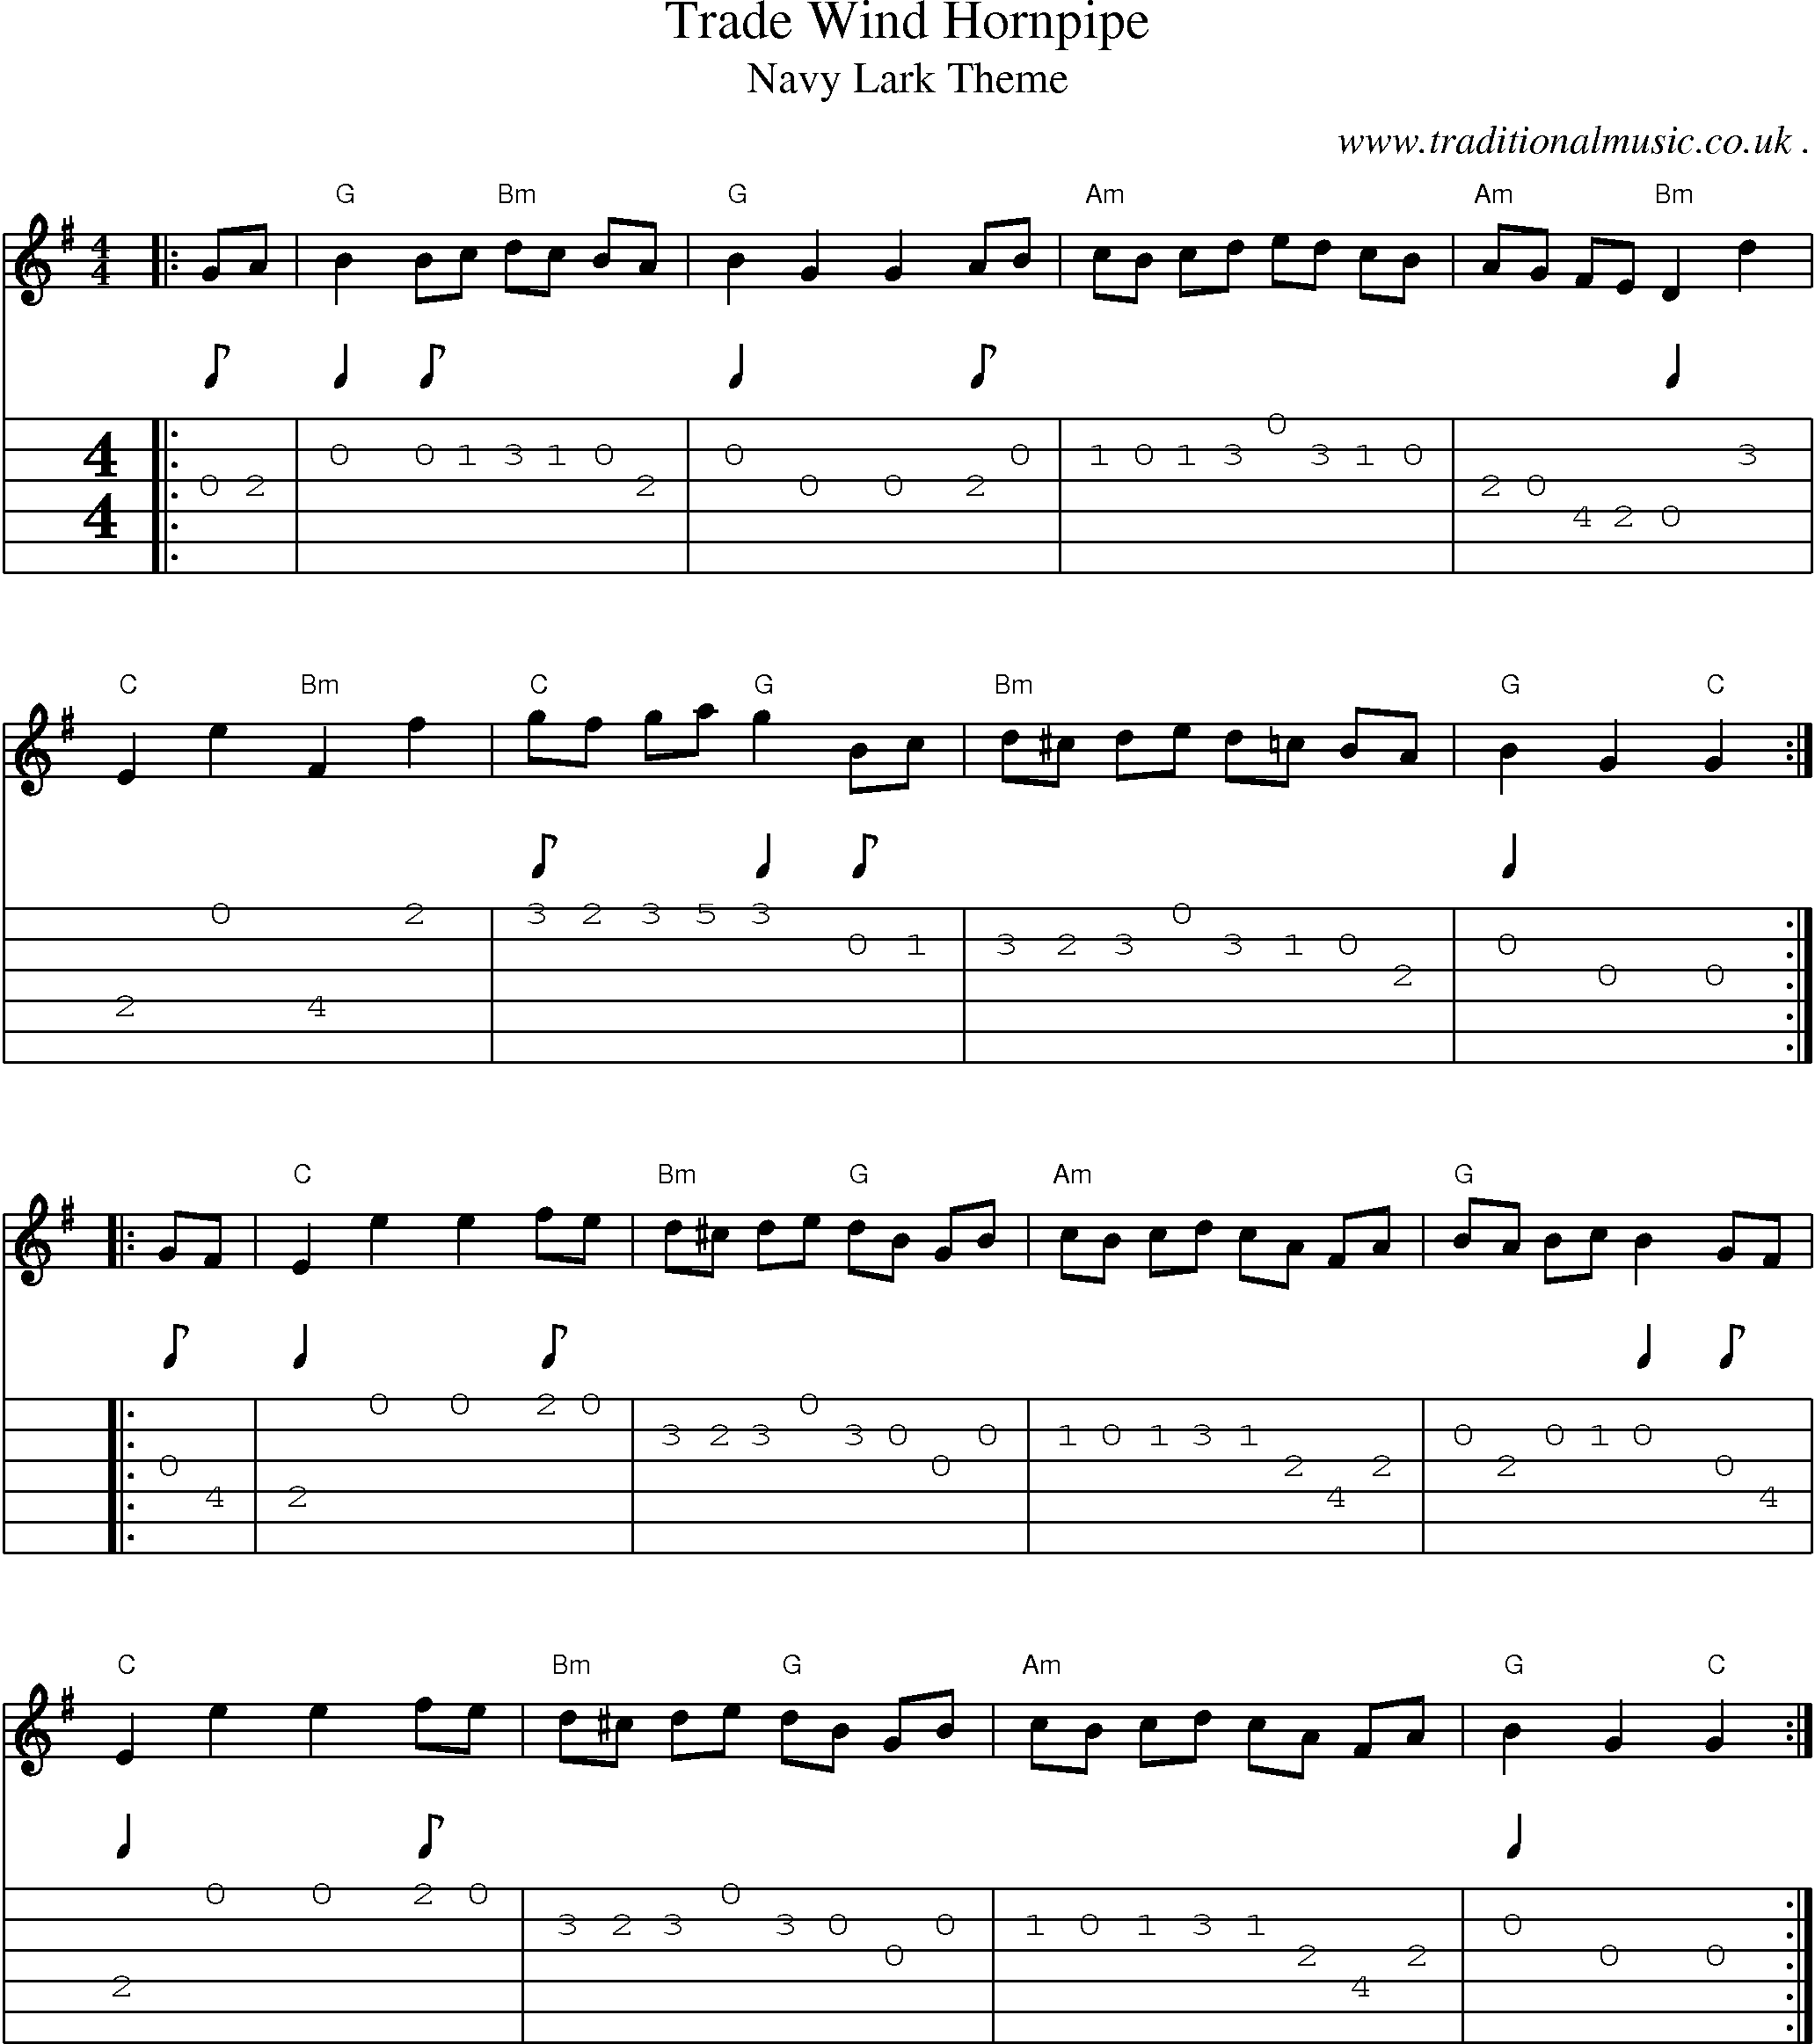 Music Score and Guitar Tabs for Trade Wind Hornpipe